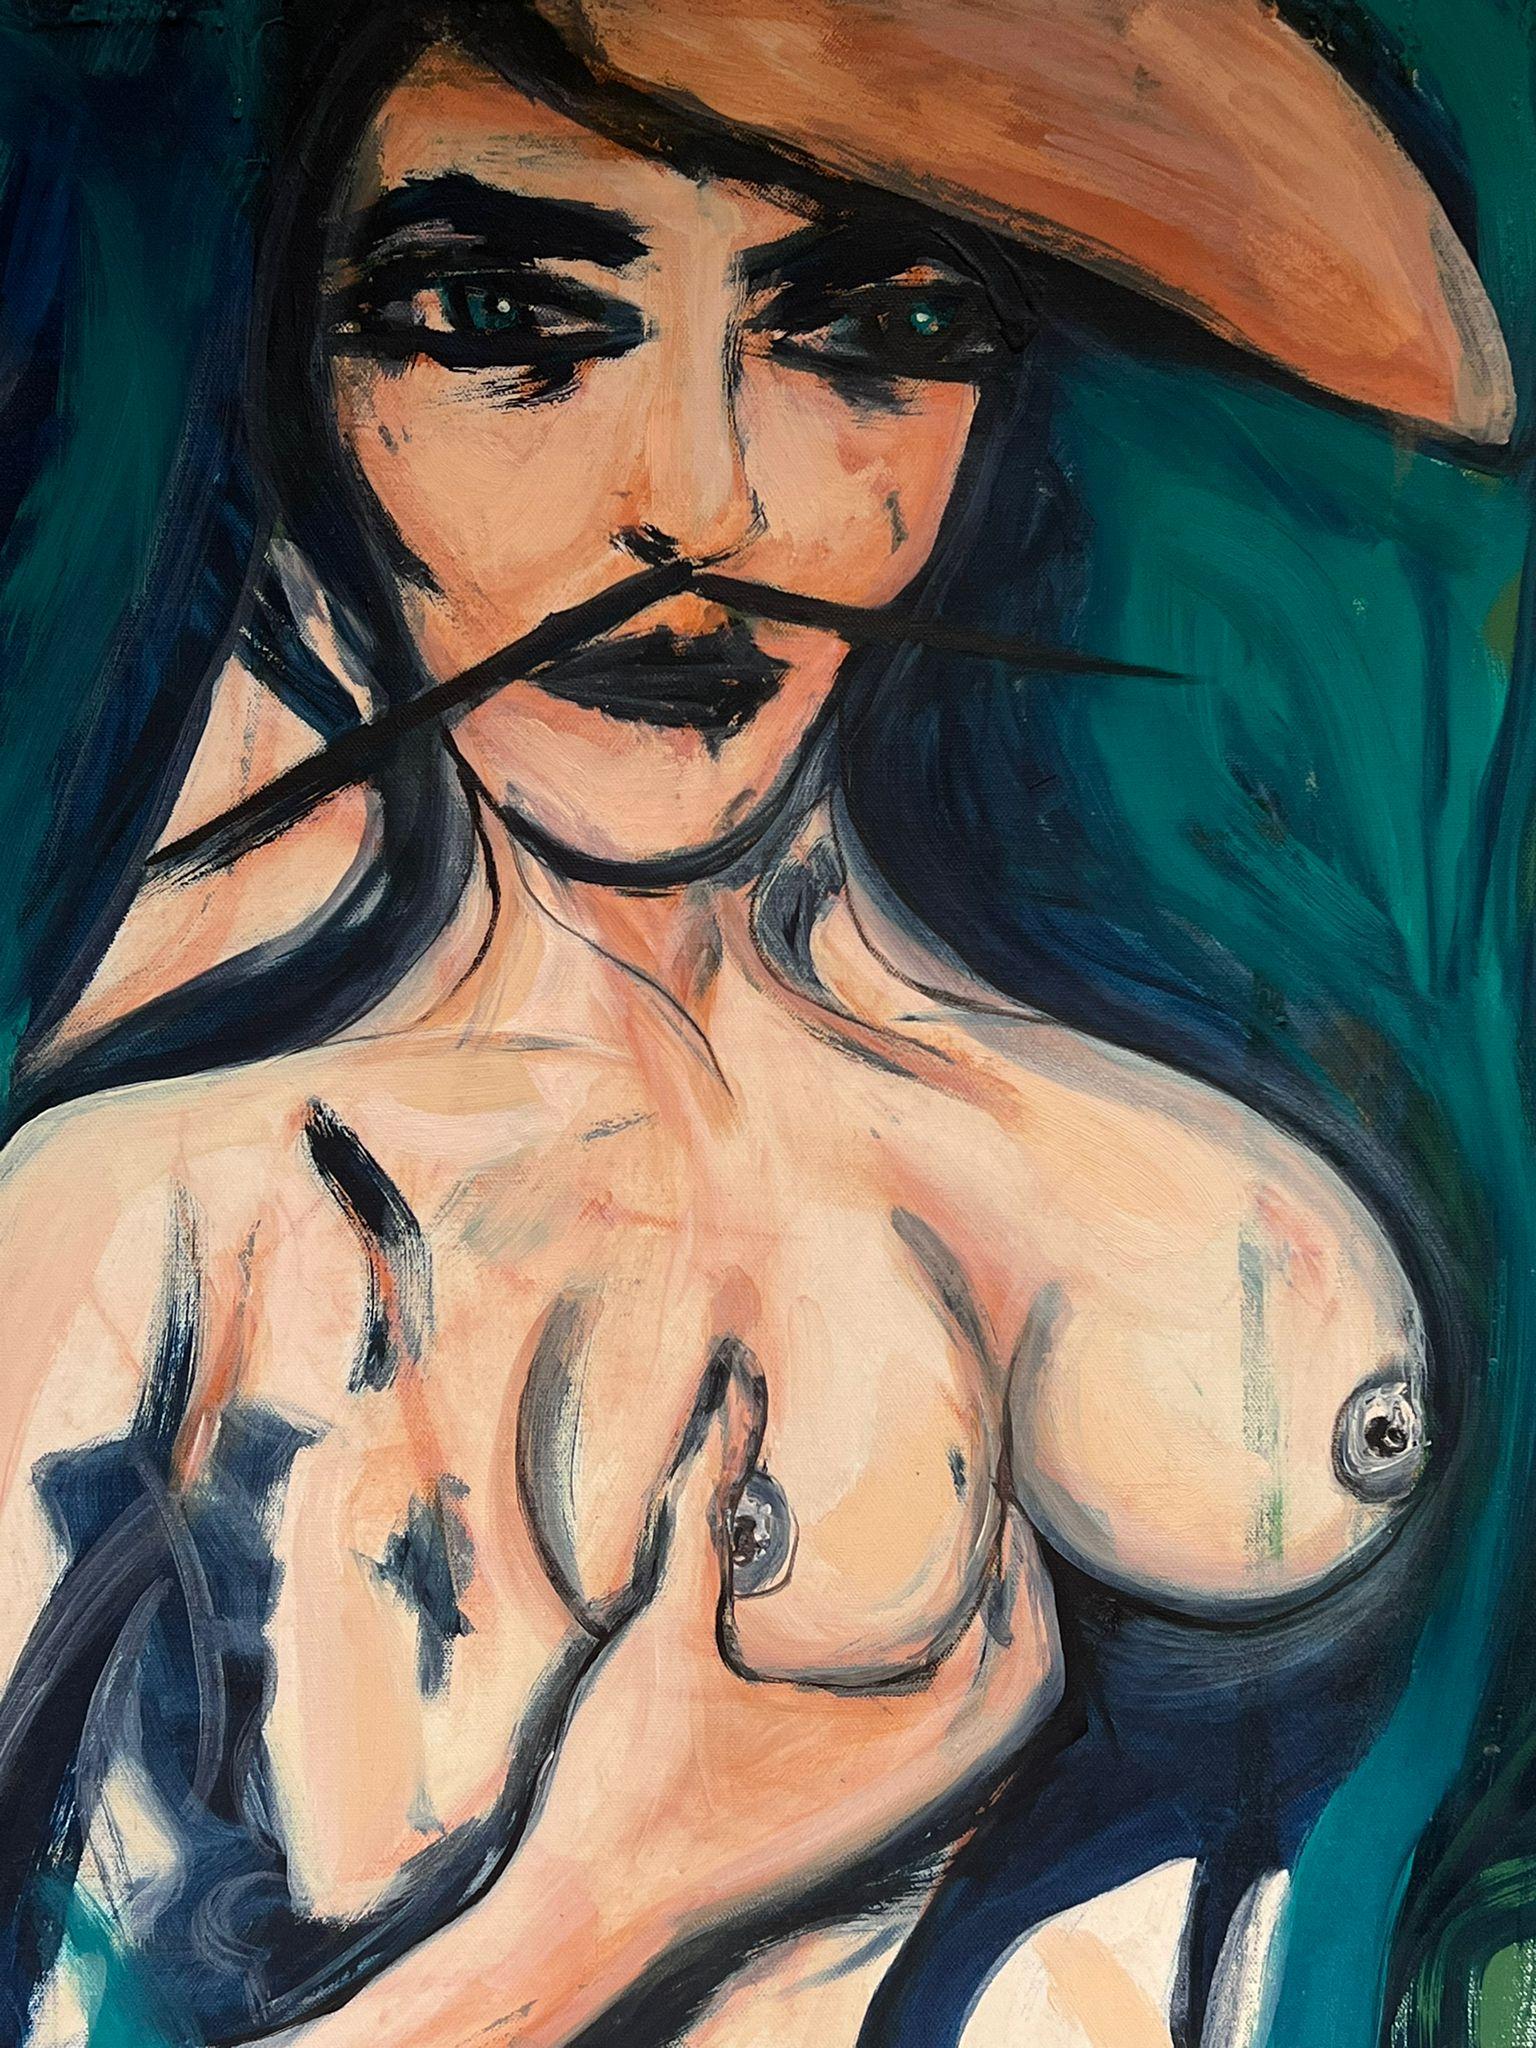 The Lady with the Moustache
French School, late 20th century
signed oil painting on canvas, unframed
canvas: 36 x 29 inches
provenance: private collection, France
condition: very good and sound condition